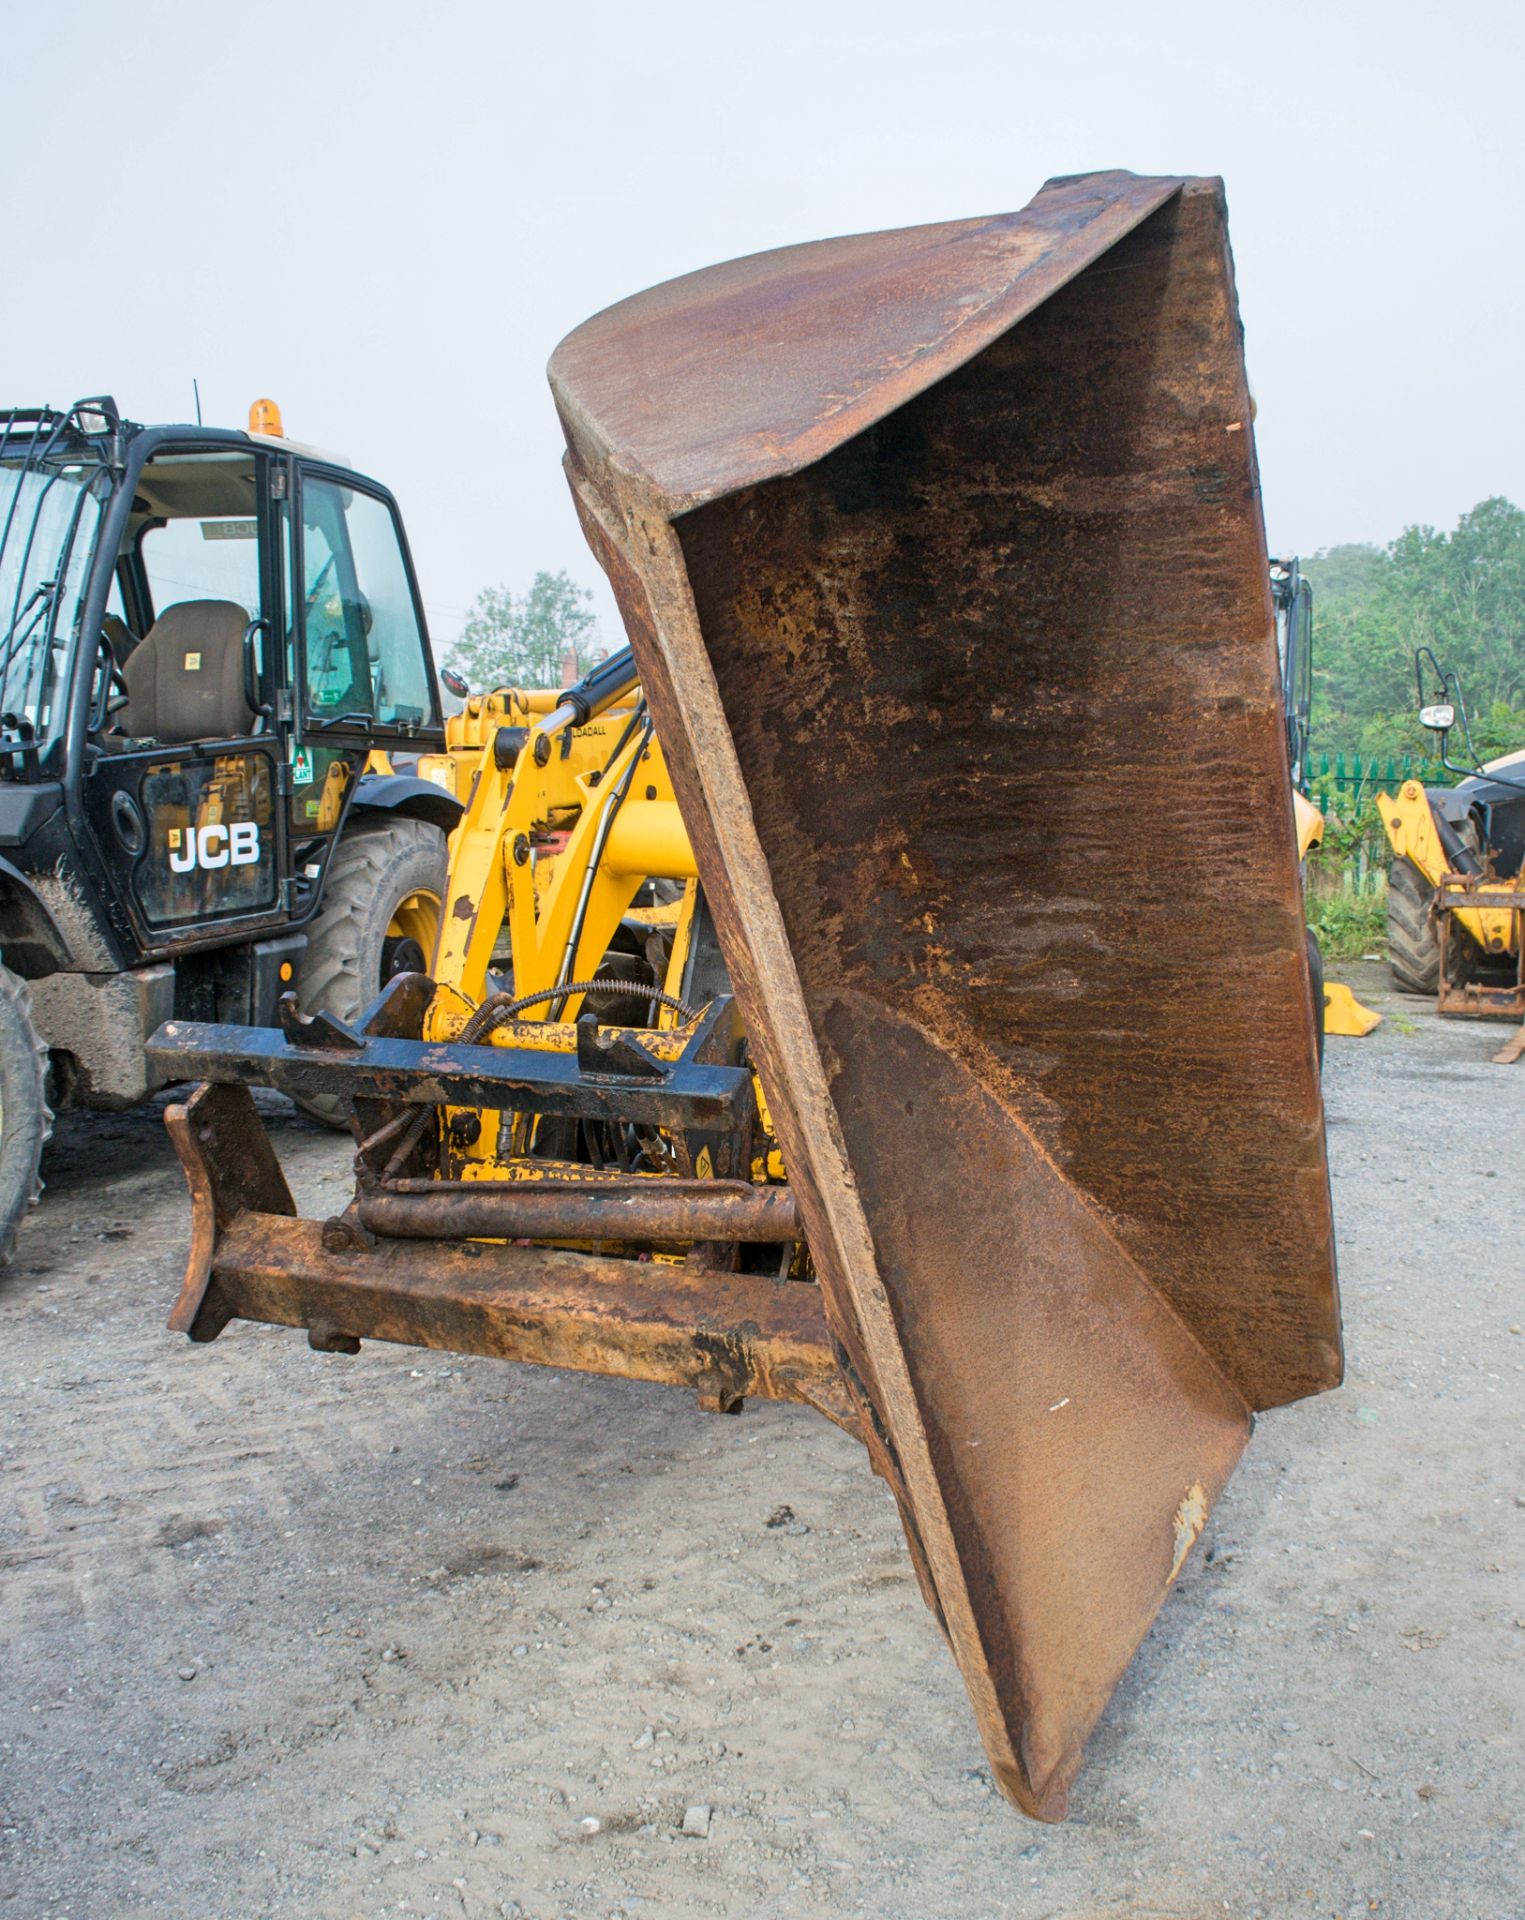 JCB 2CX Airmaster loading shovel Year: 2013 S/N: 1709275 Recorded Hours: 2907 - Image 16 of 17